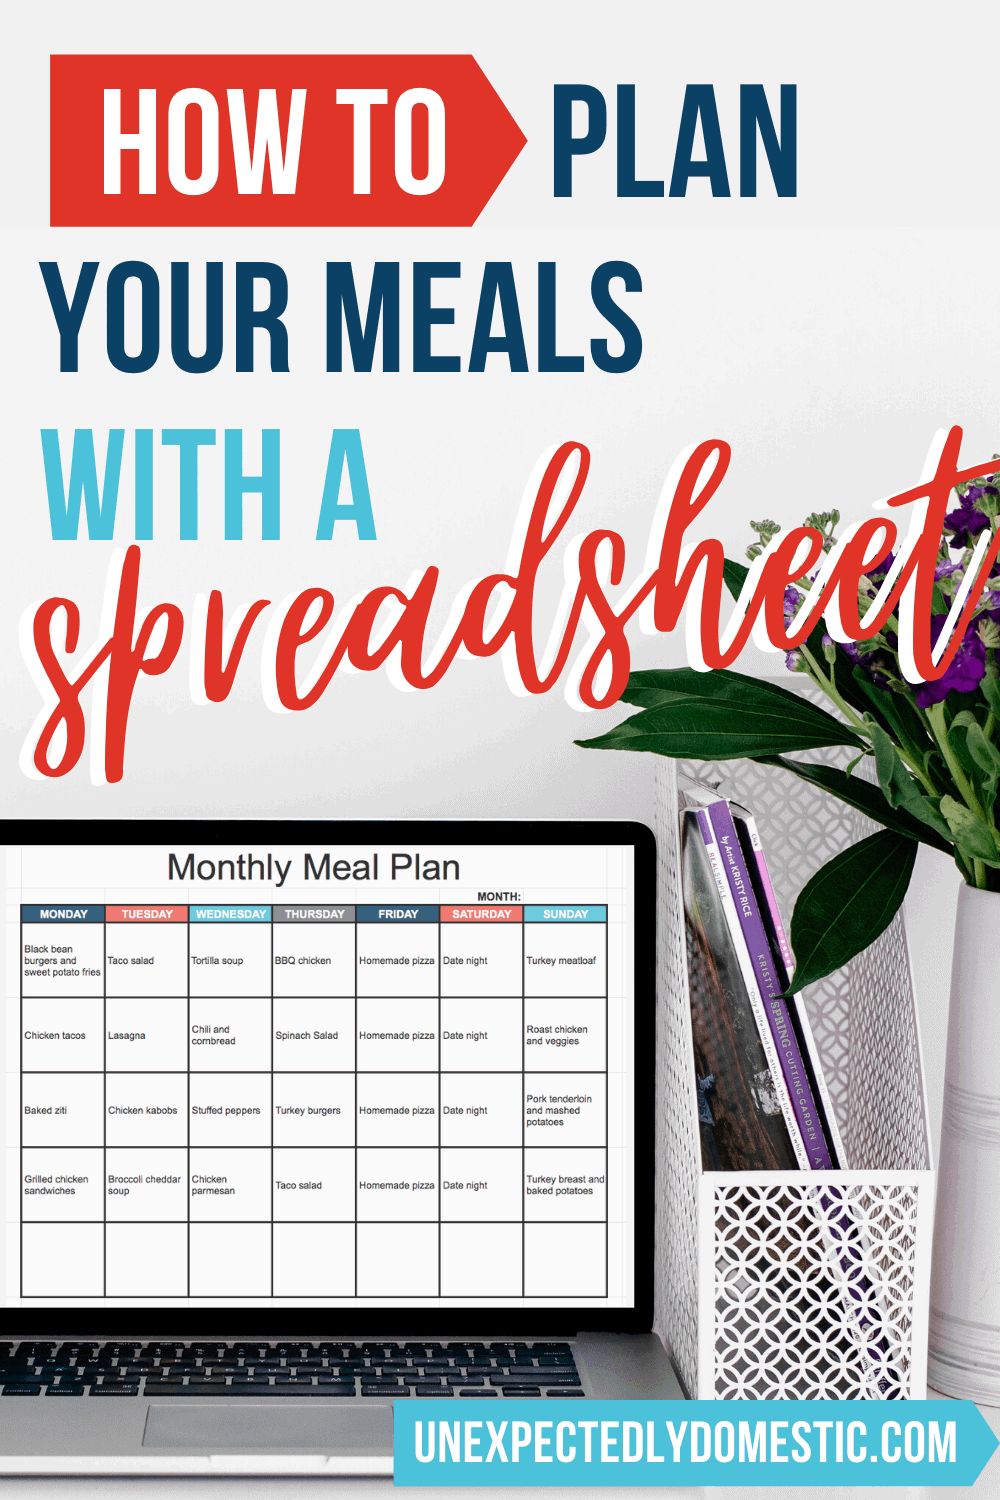 A Google Sheets meal planner, plus editable grocery list template! How to use a meal planning spreadsheet to plan your weekly menu in minutes.